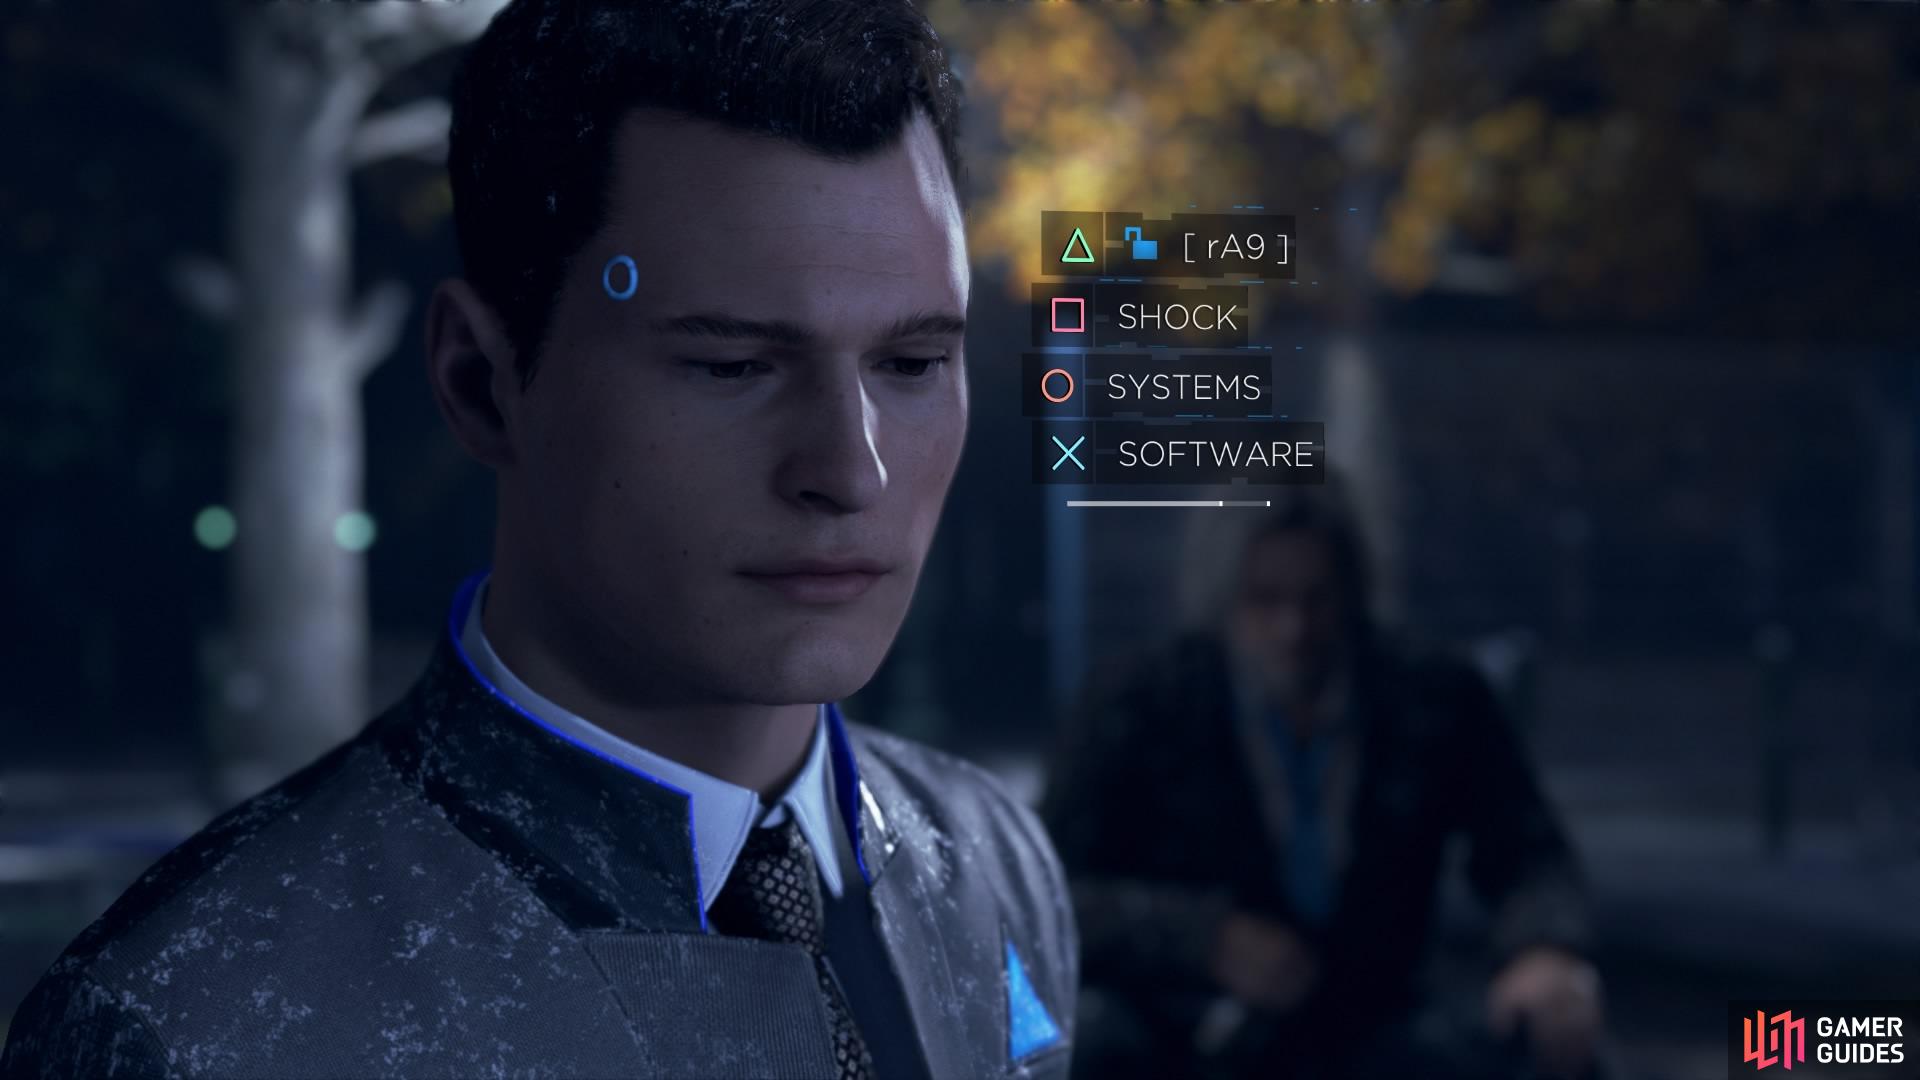 How To Get The Best Ending For Connor And Hank In Detroit: Become